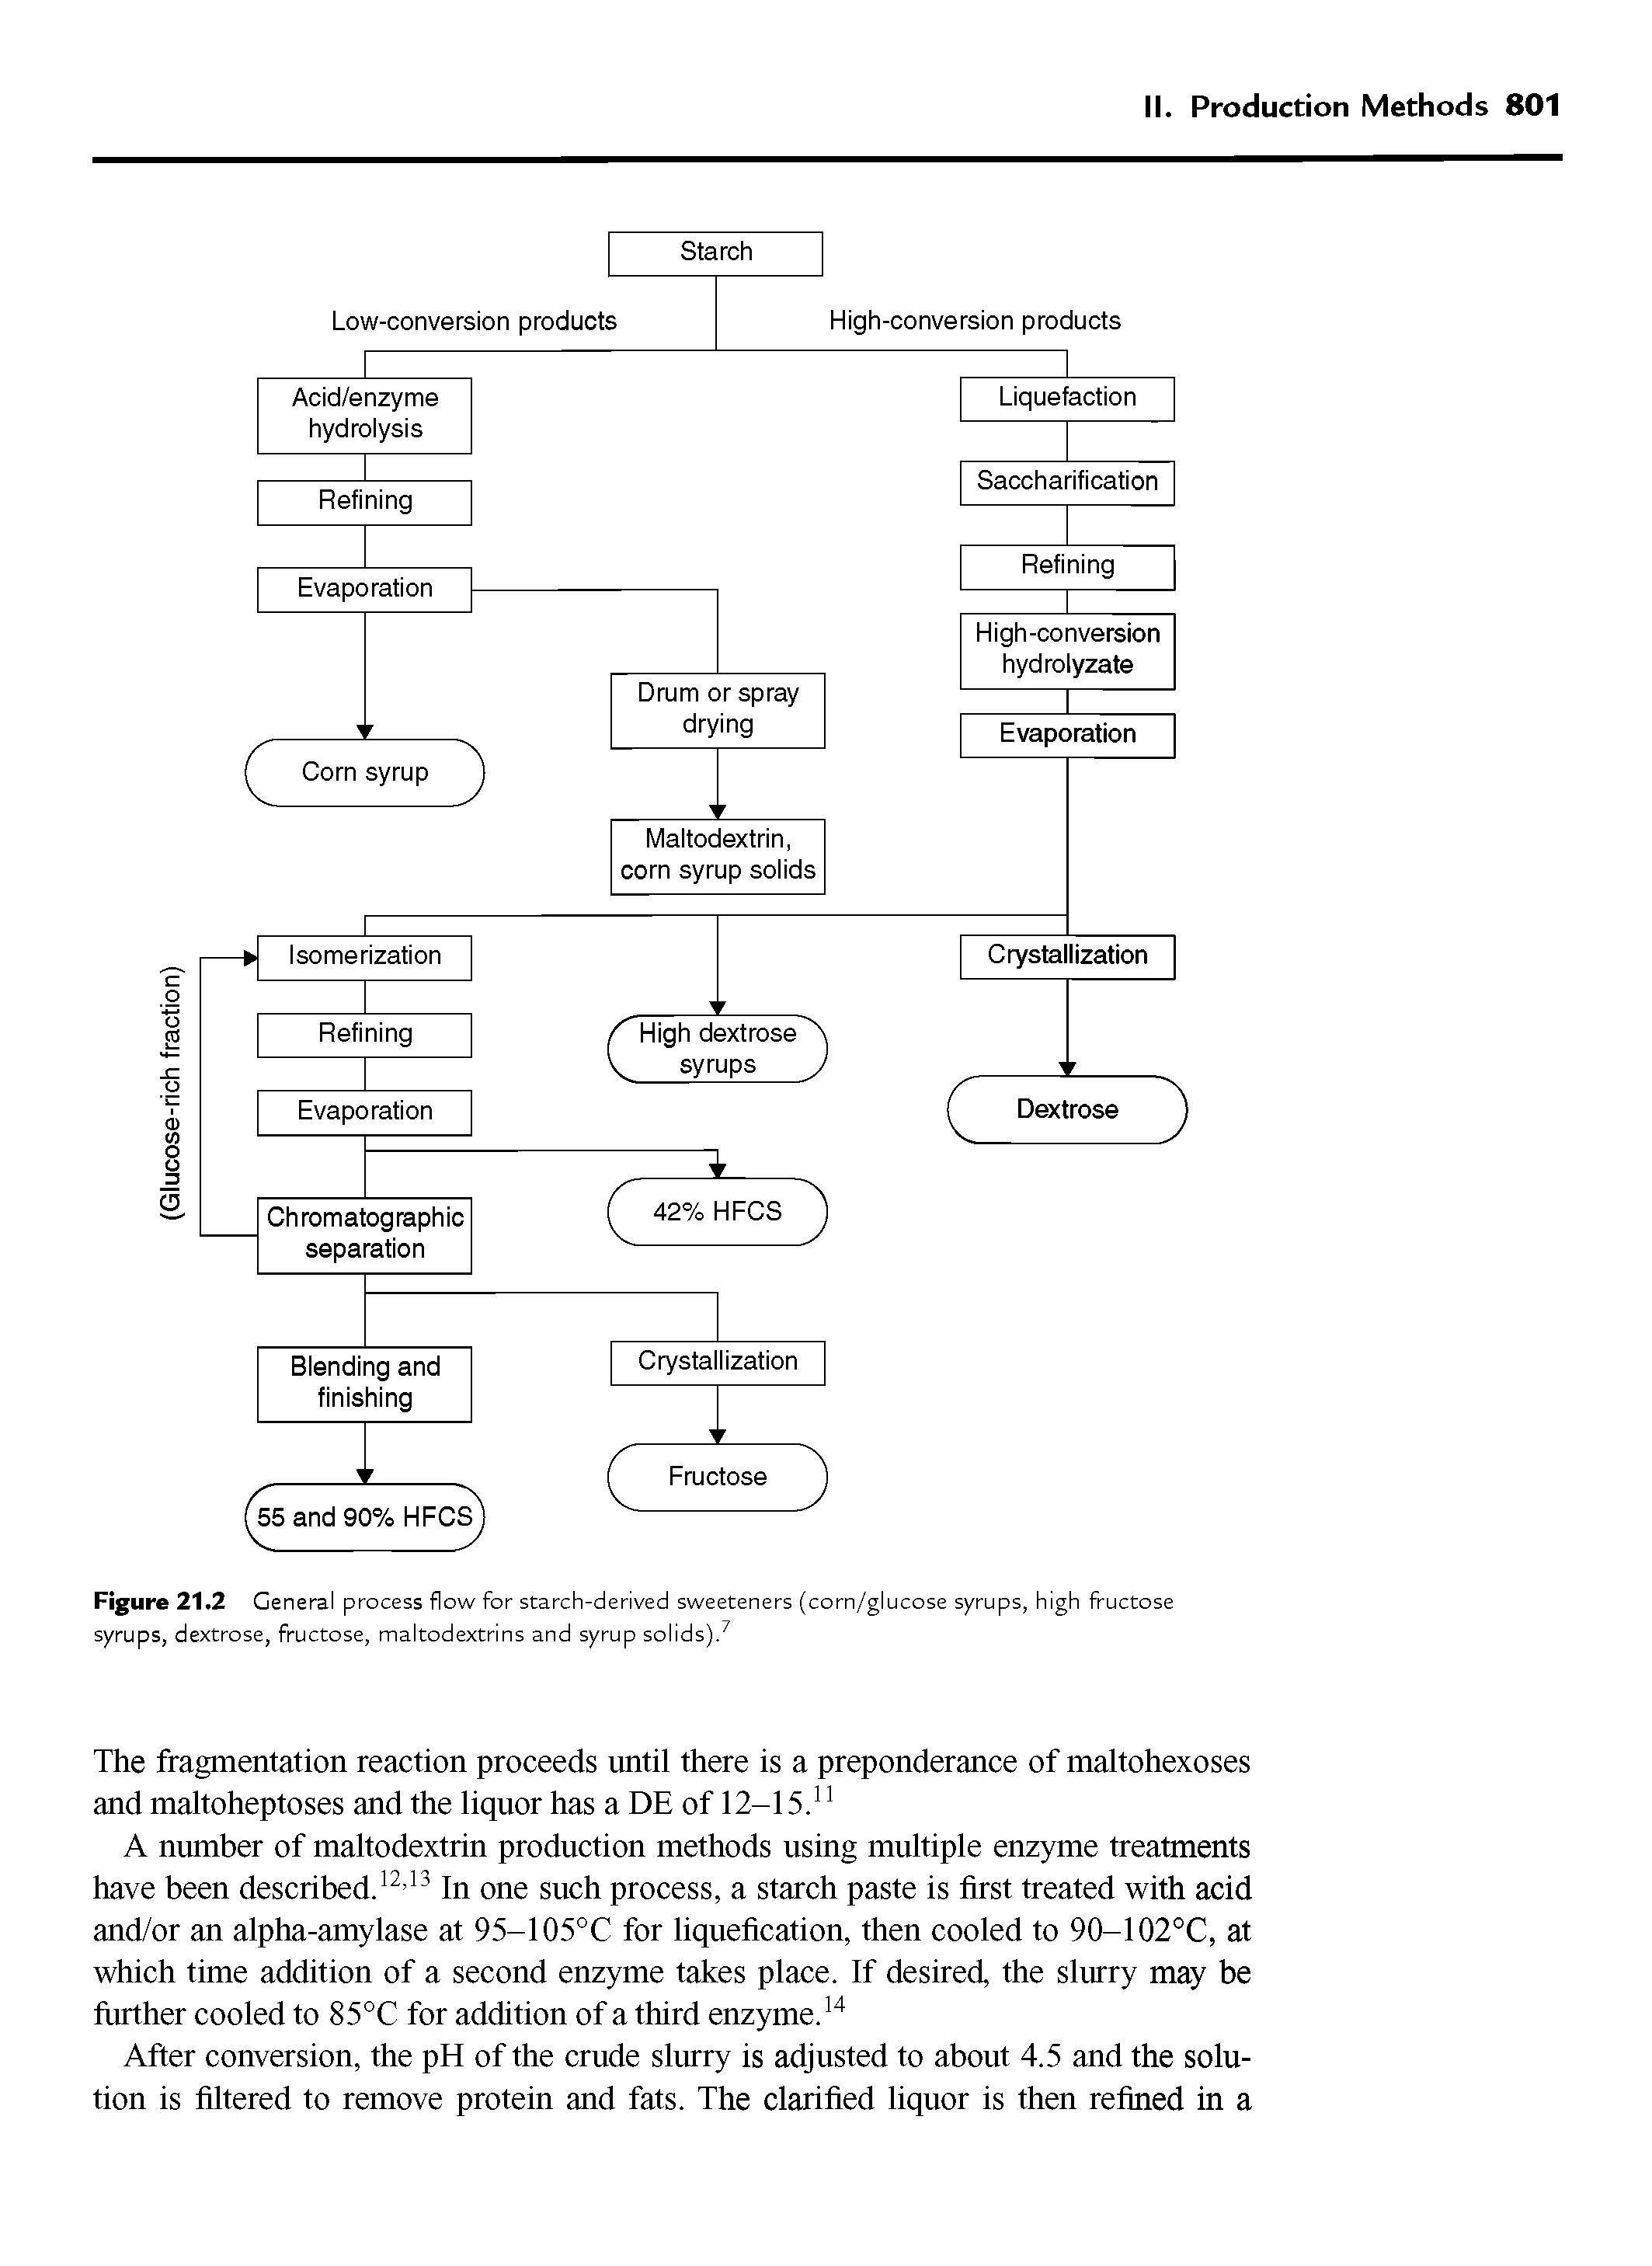 Figure 21.2 General process flow for starch-derived sweeteners (corn/glucose syrups, high fructose syrups, dextrose, fructose, maltodextrins and syrup solids).7...